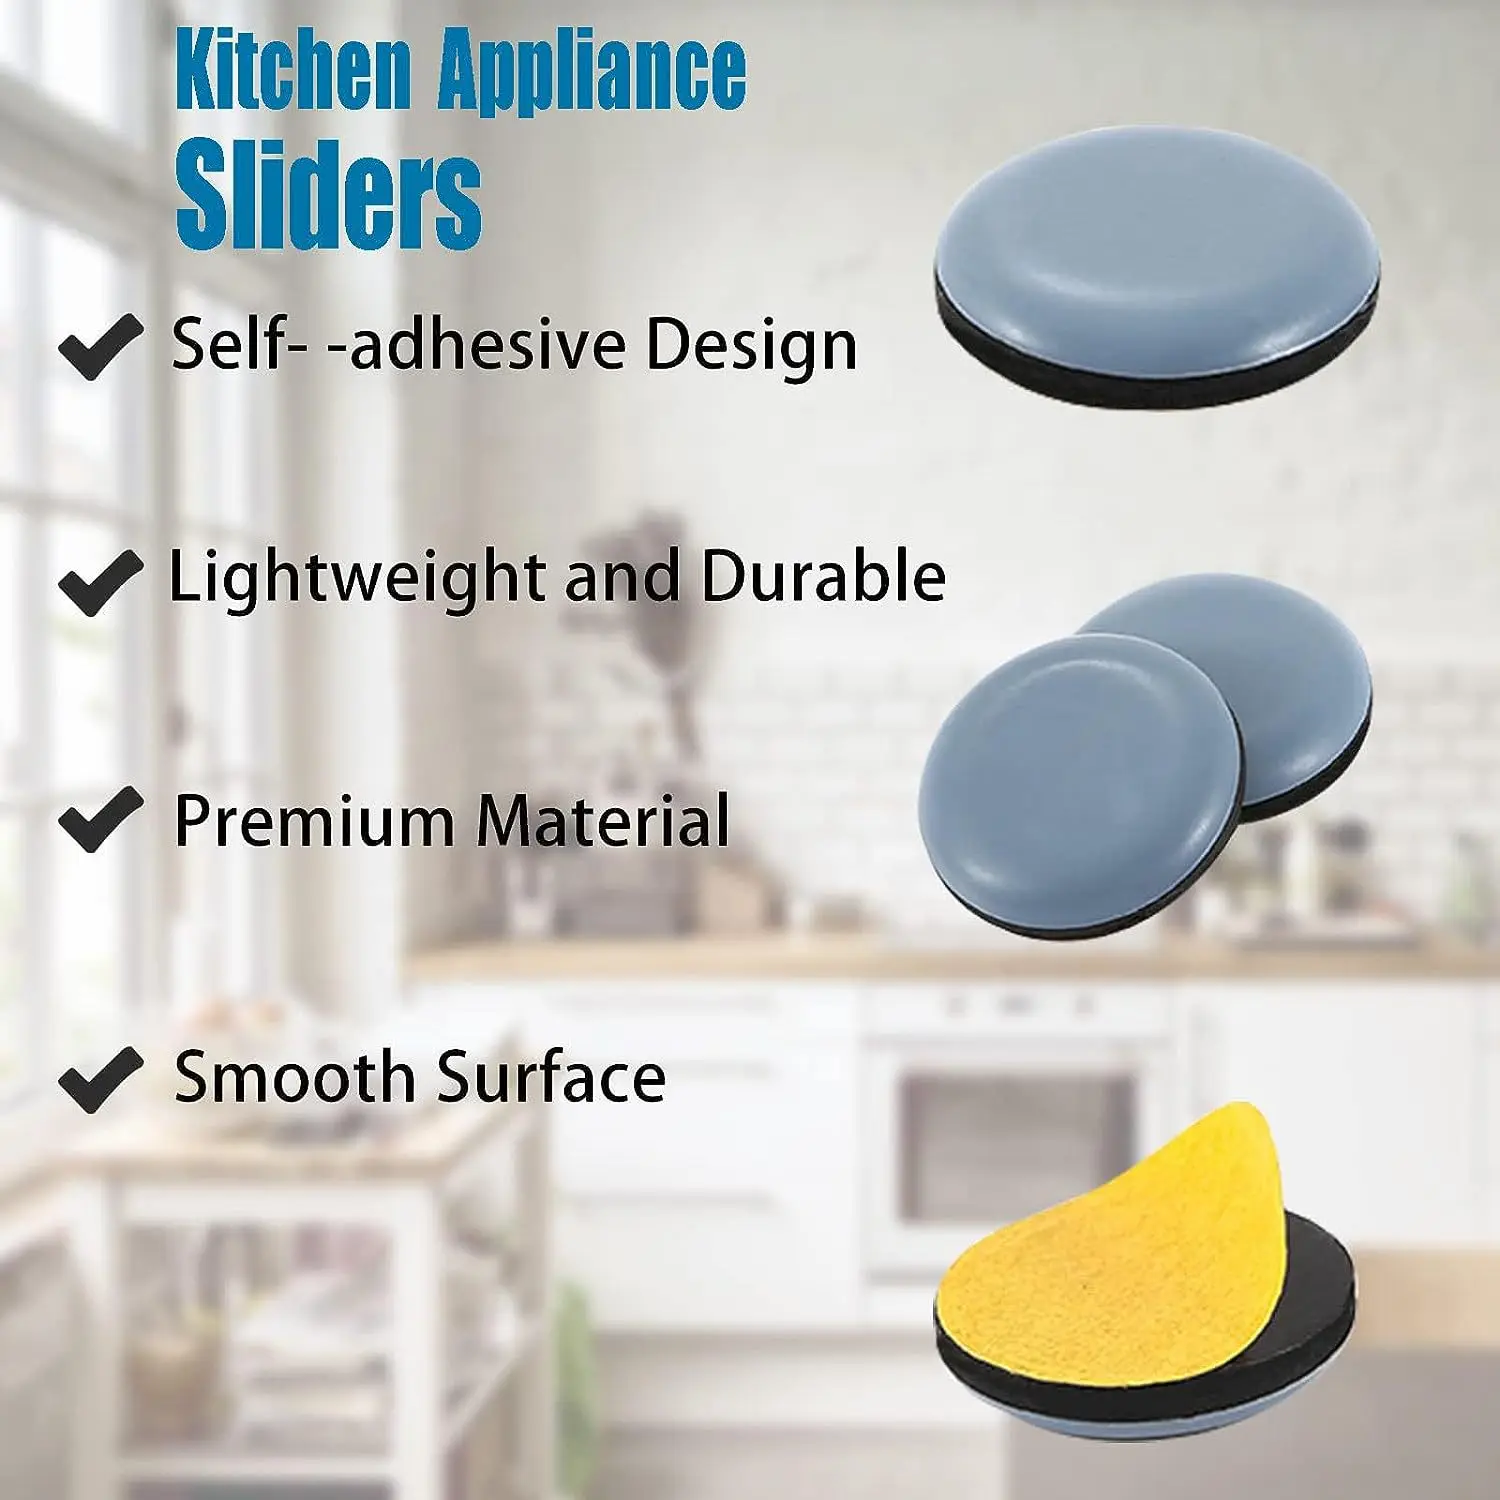 Appliance Sliders for Kitchen Appliances Self-adhesive Small Kitchen  Appliance Slider Kitchen Hacks Easy to MoIing & Space Savin